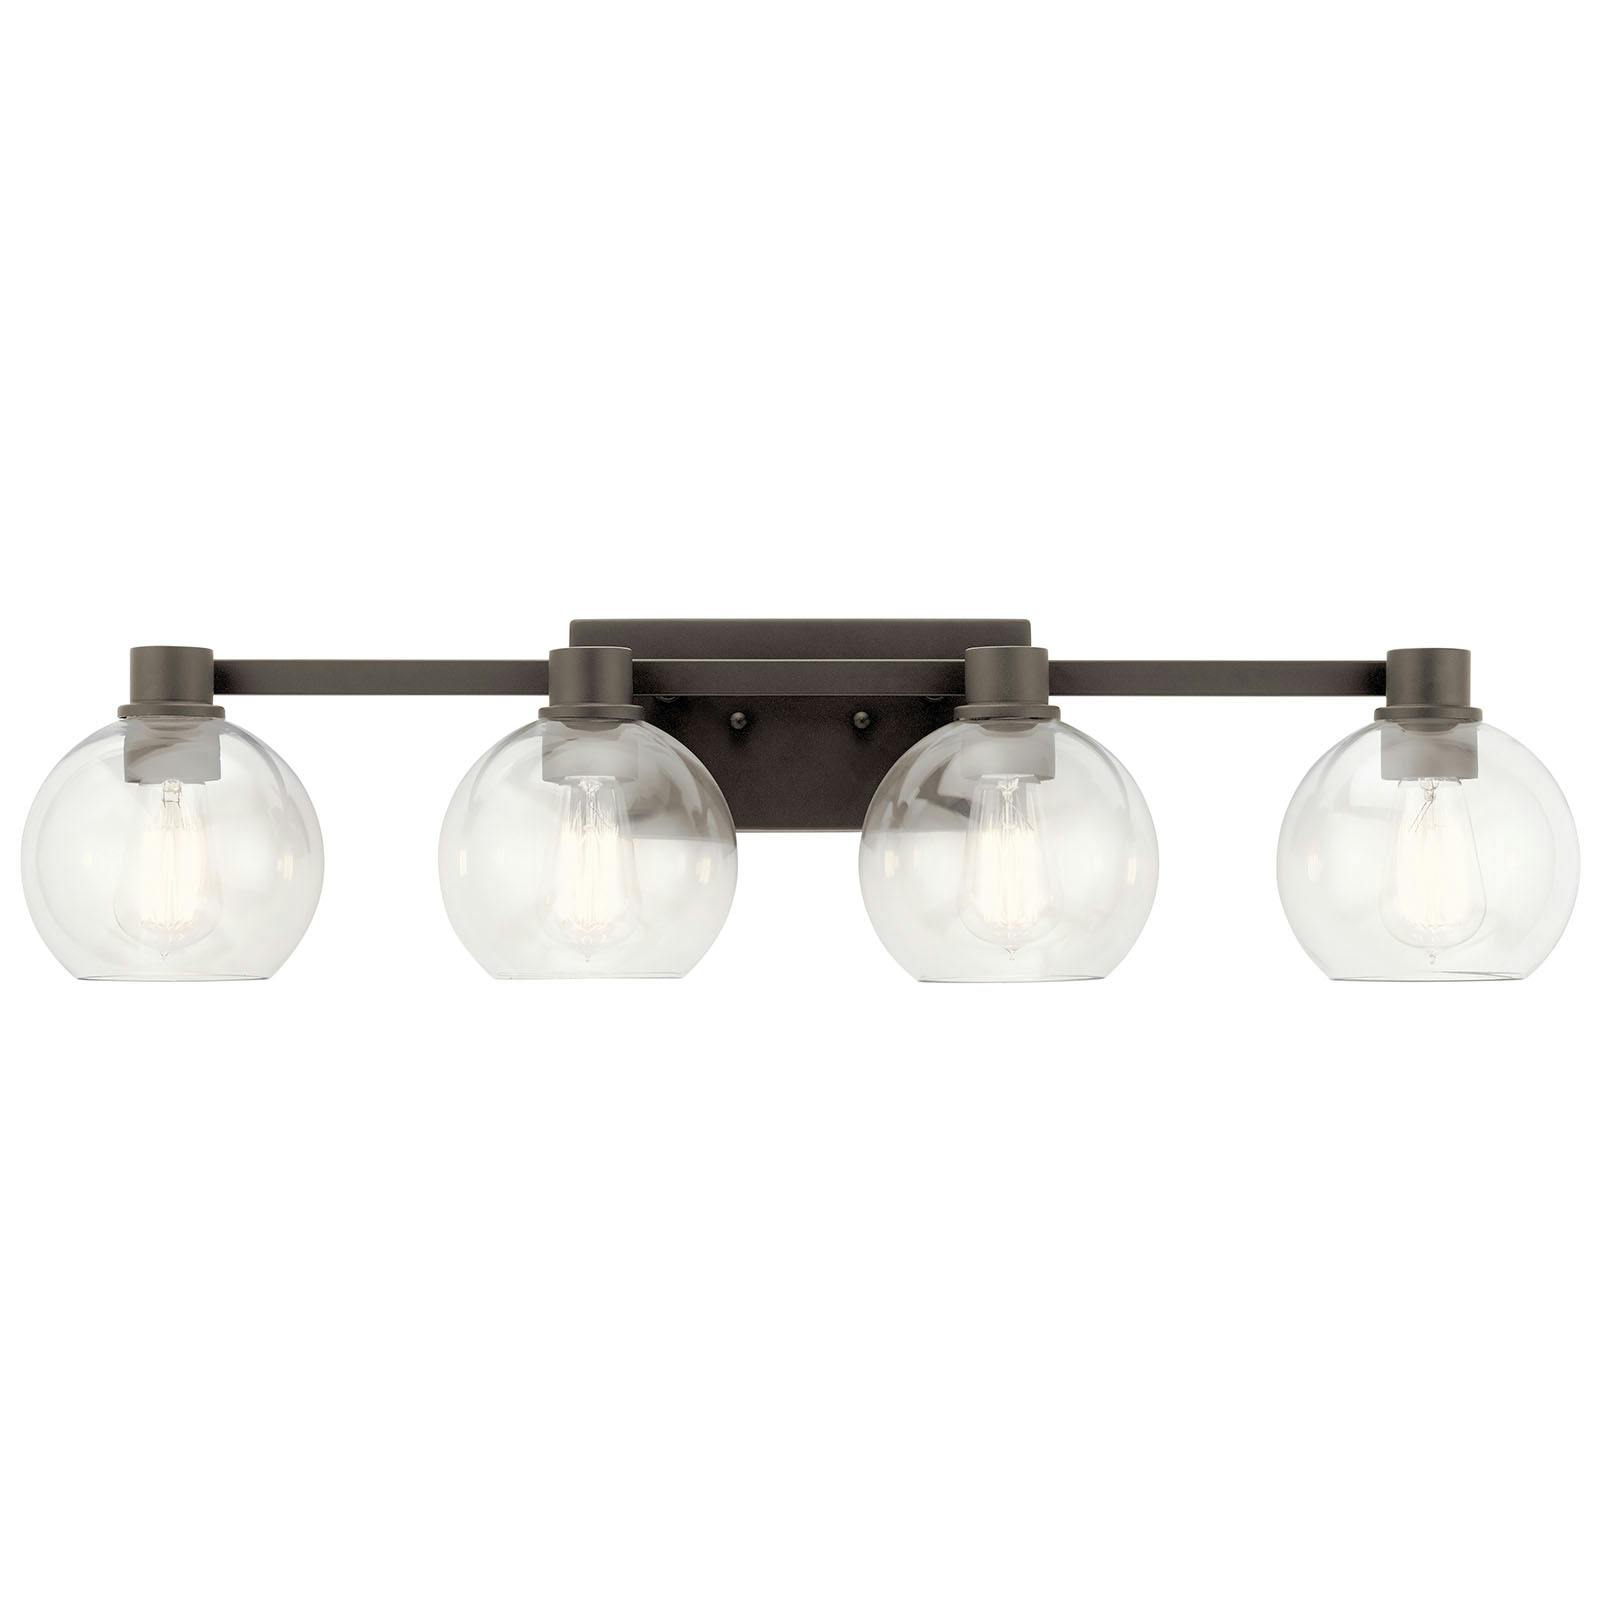 The Harmony 4 Light Vanity Light Olde Bronze® facing down on a white background